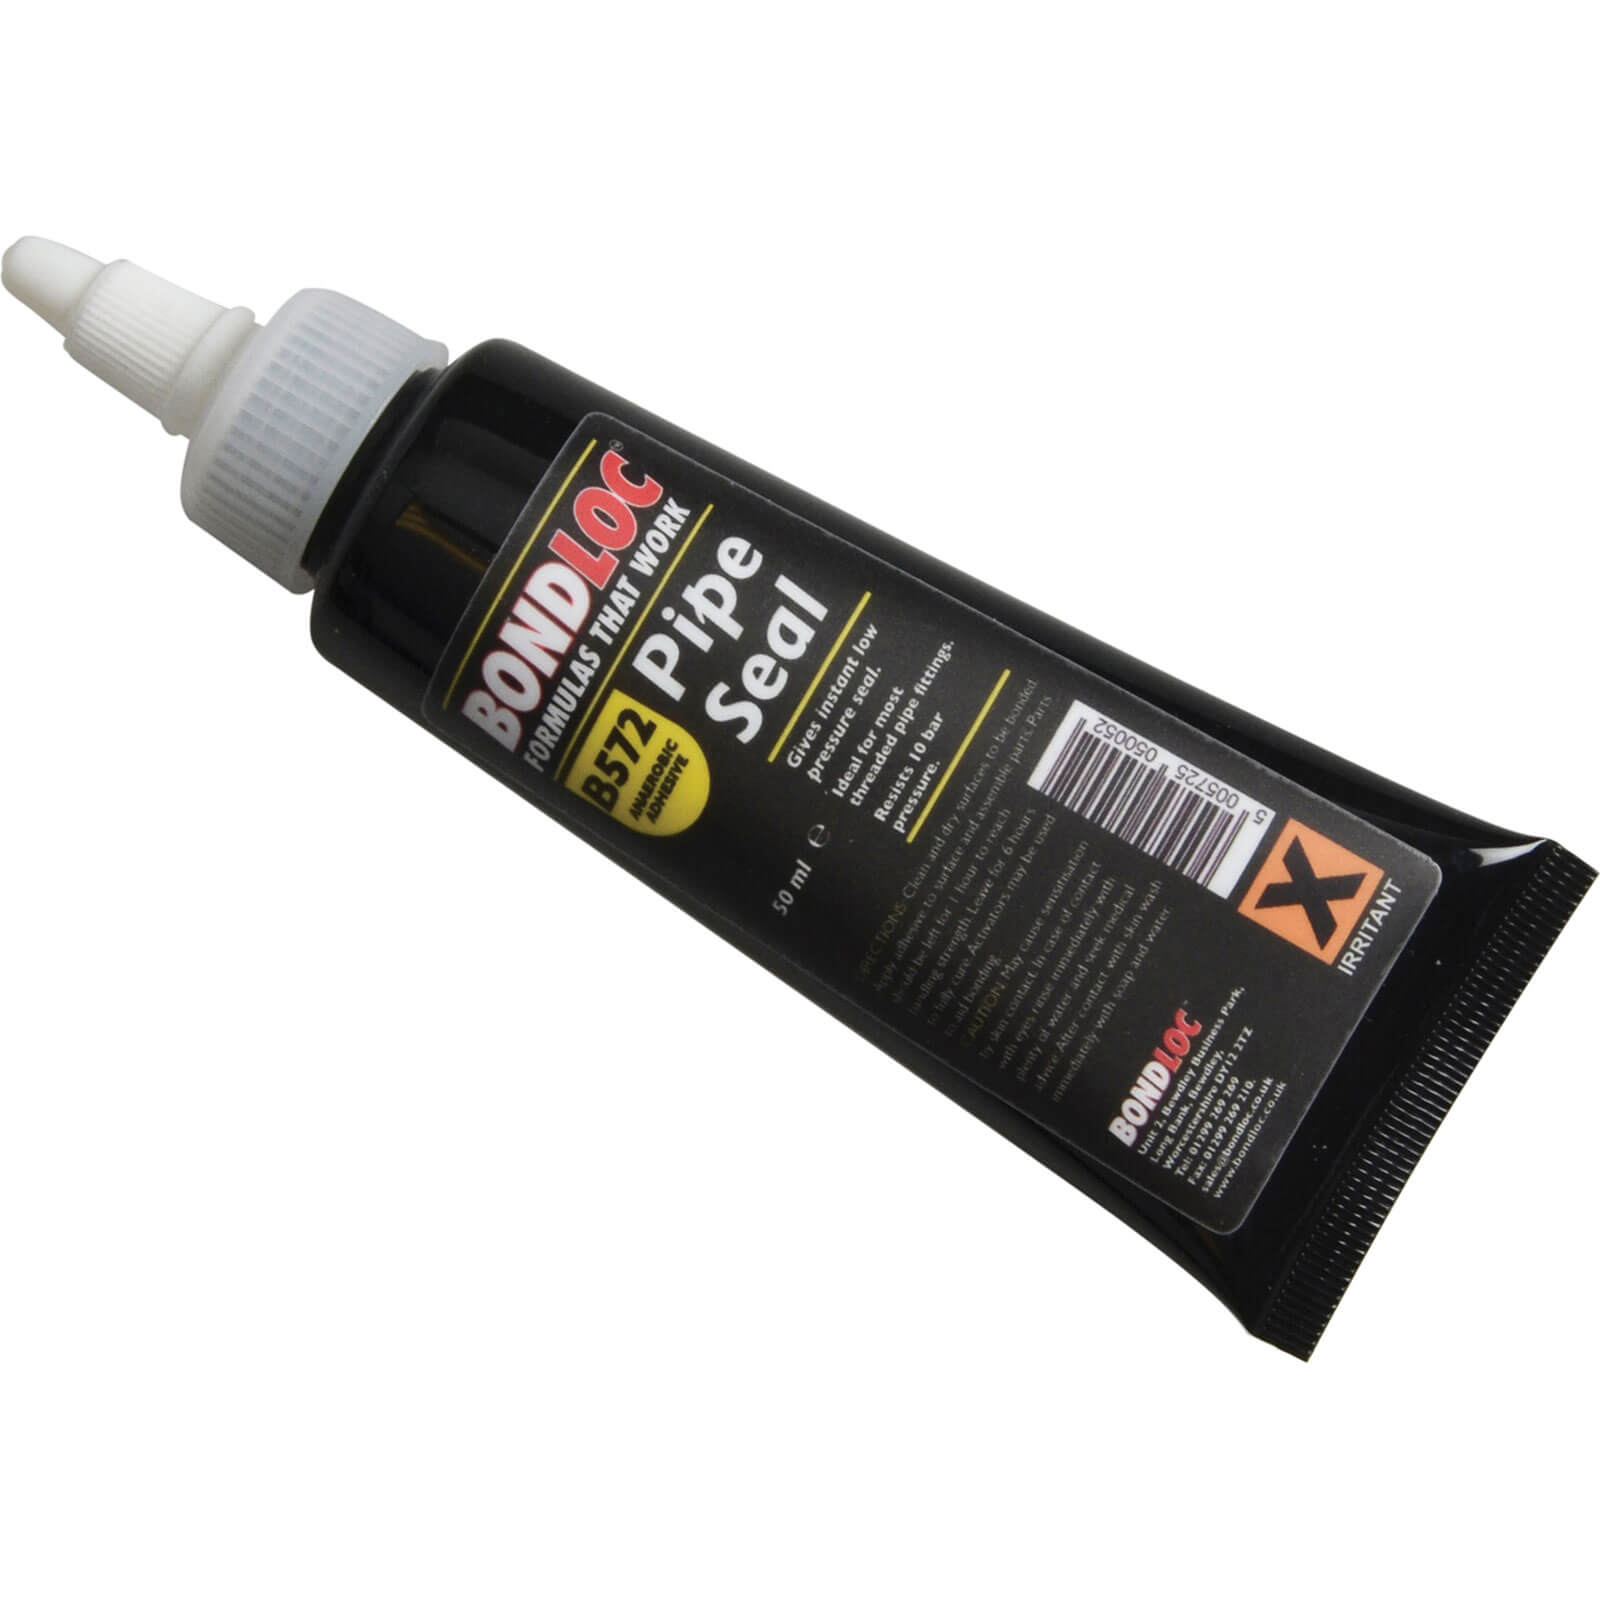 Image of Bondloc B572 Pipeseal Slow Cure Sealant for Pipes and Fittings 50ml